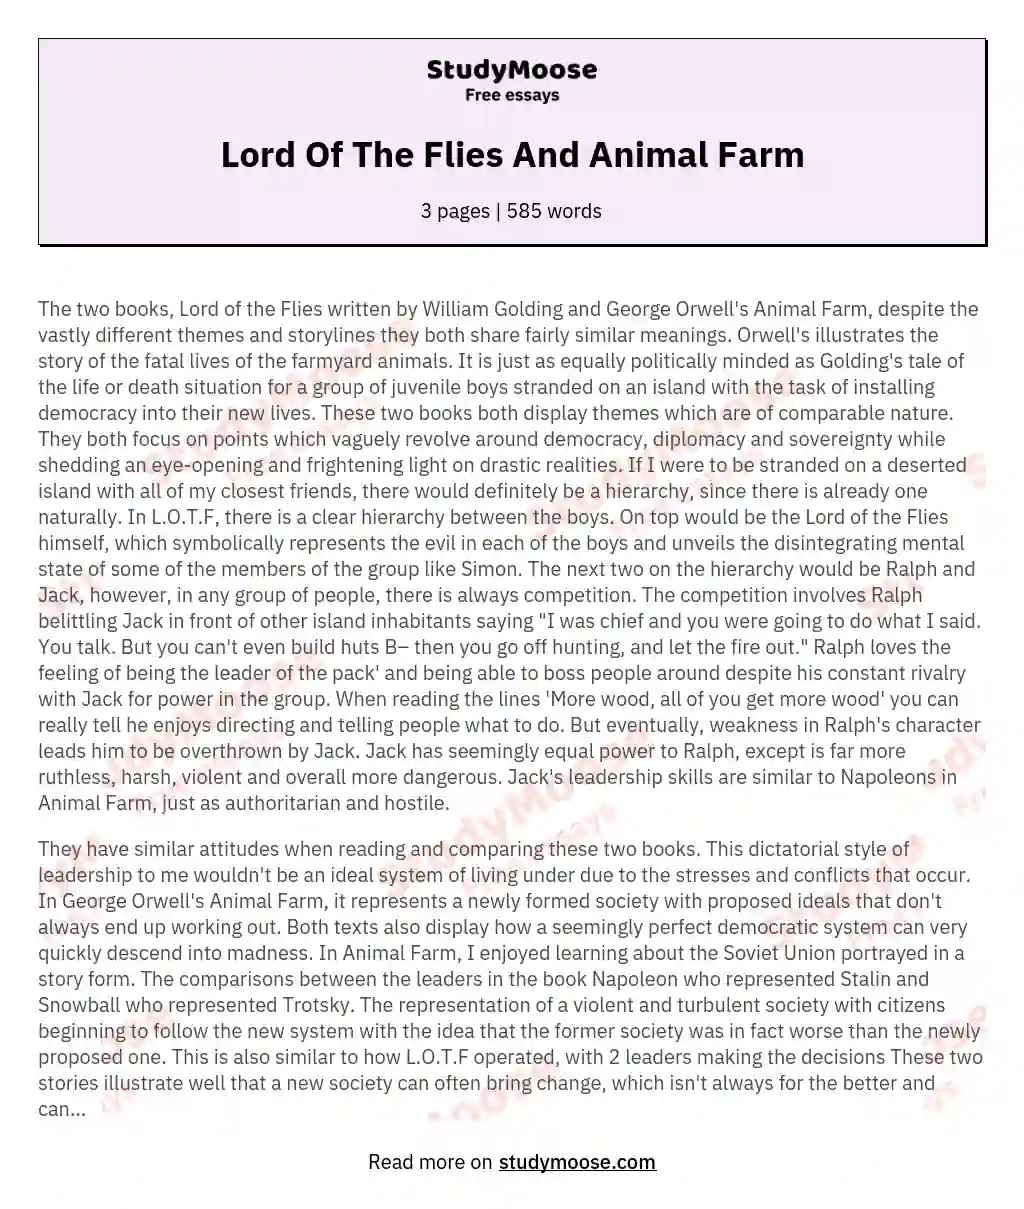 Lord Of The Flies And Animal Farm essay